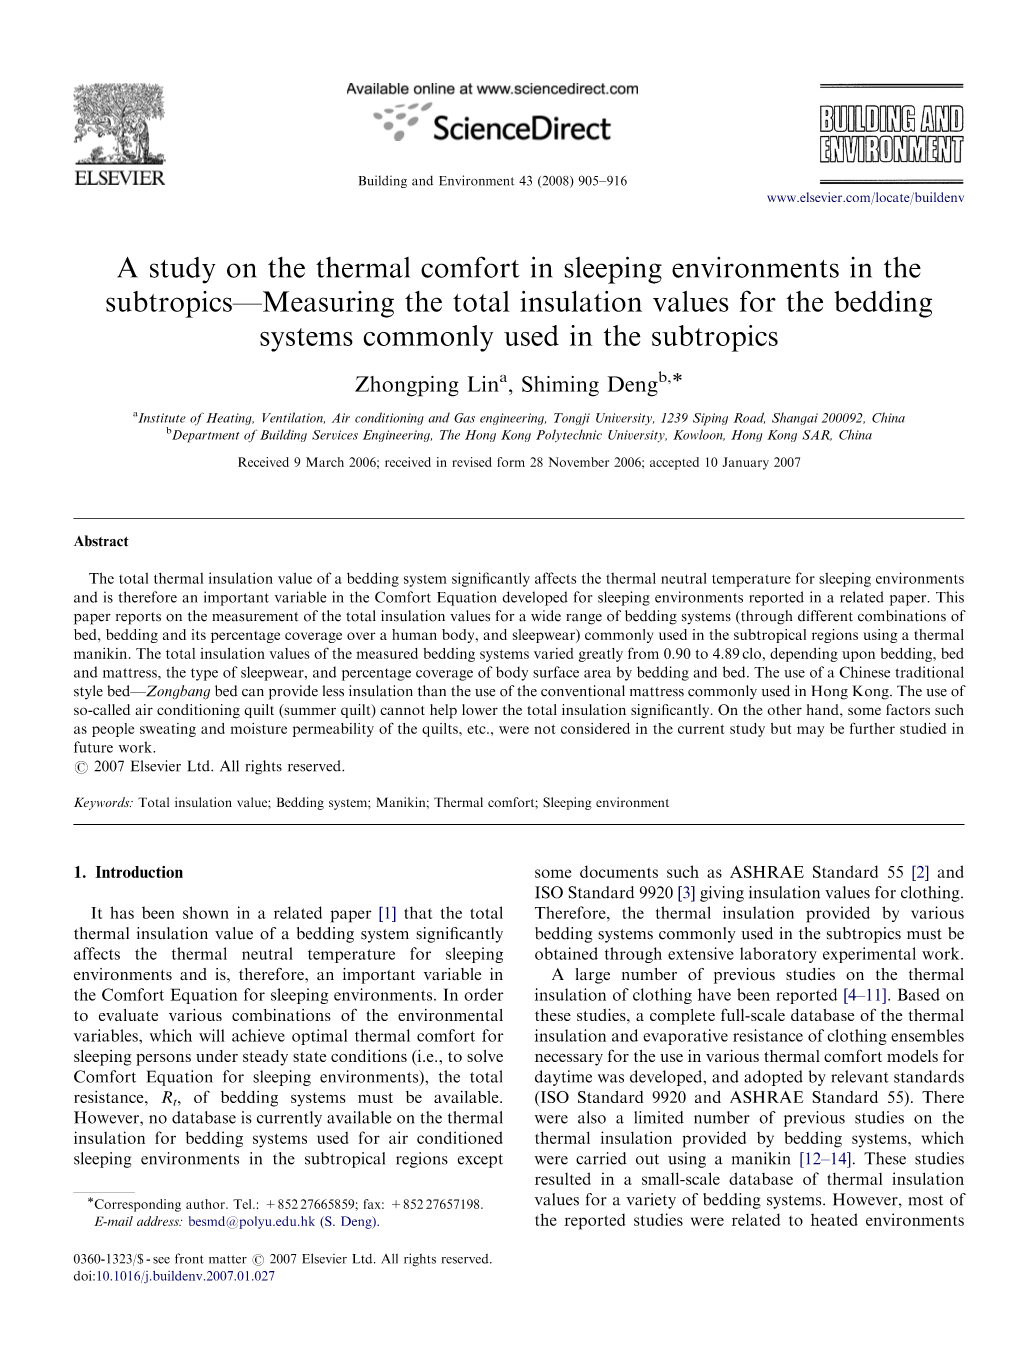 A Study on the Thermal Comfort in Sleeping Environments In